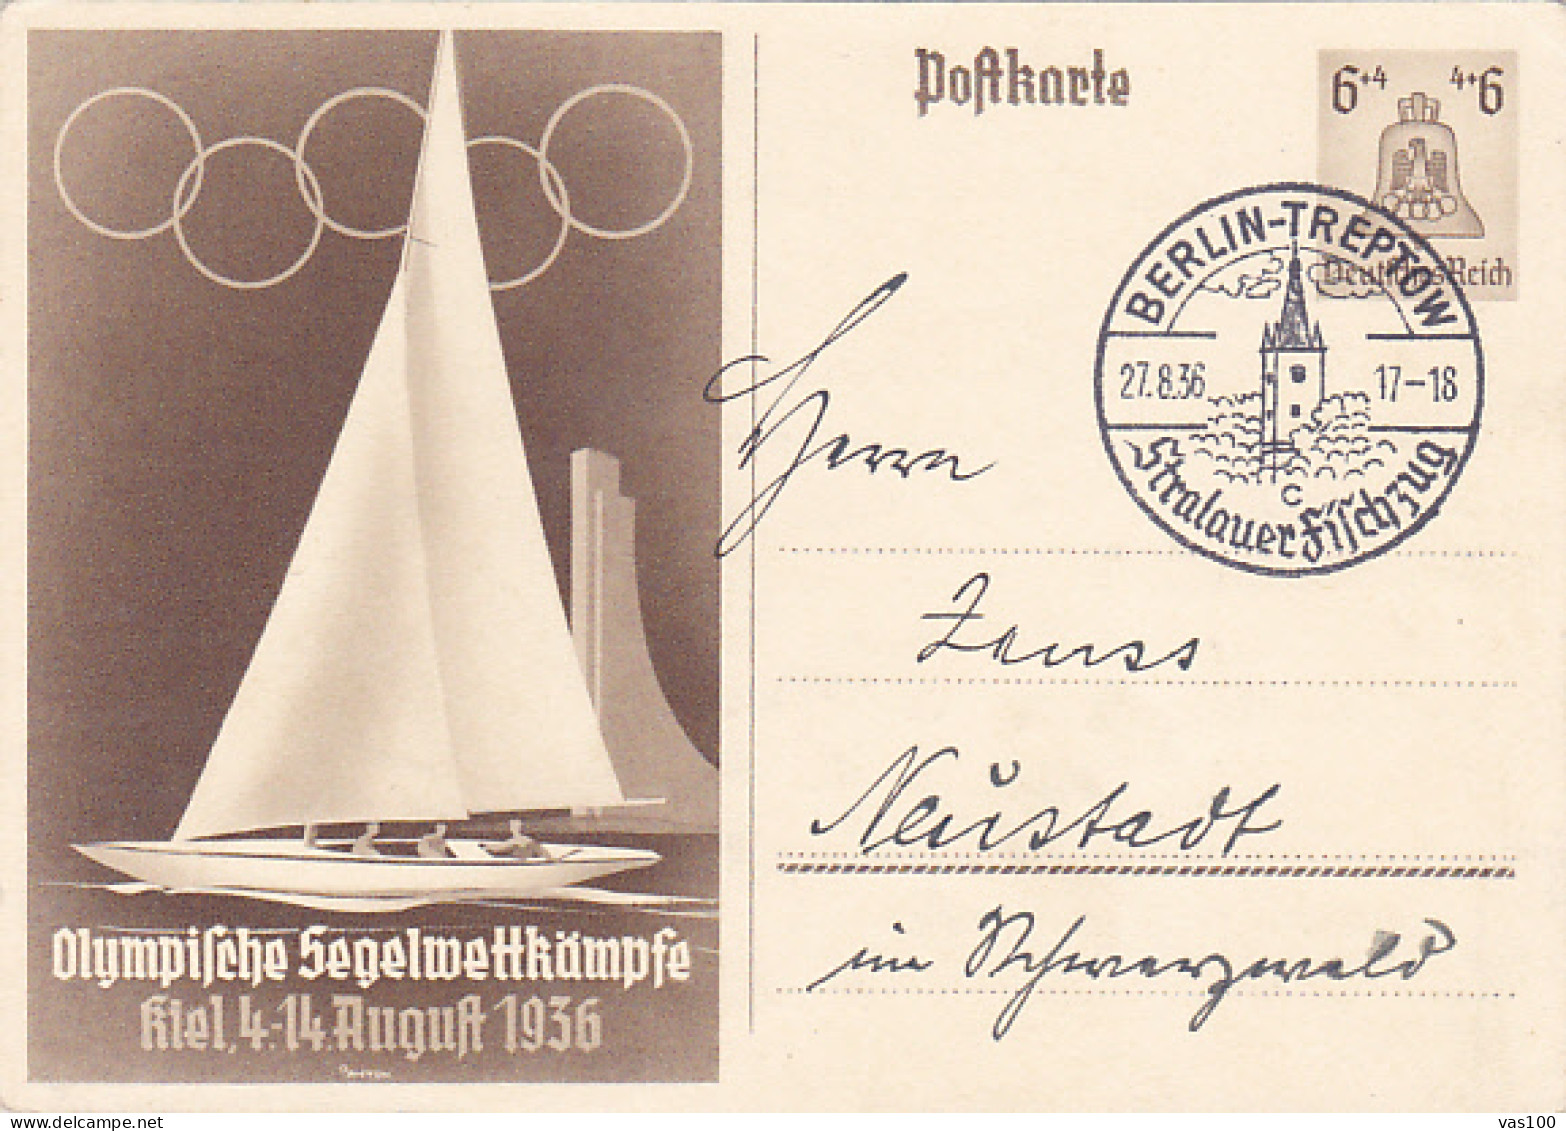 OLYMPIC GAMES, BERLIN'36, SUMMER, SAILING BOAT, PC STATIONERY, ENTIER POSTAL, 1936, GERMANY - Sommer 1936: Berlin